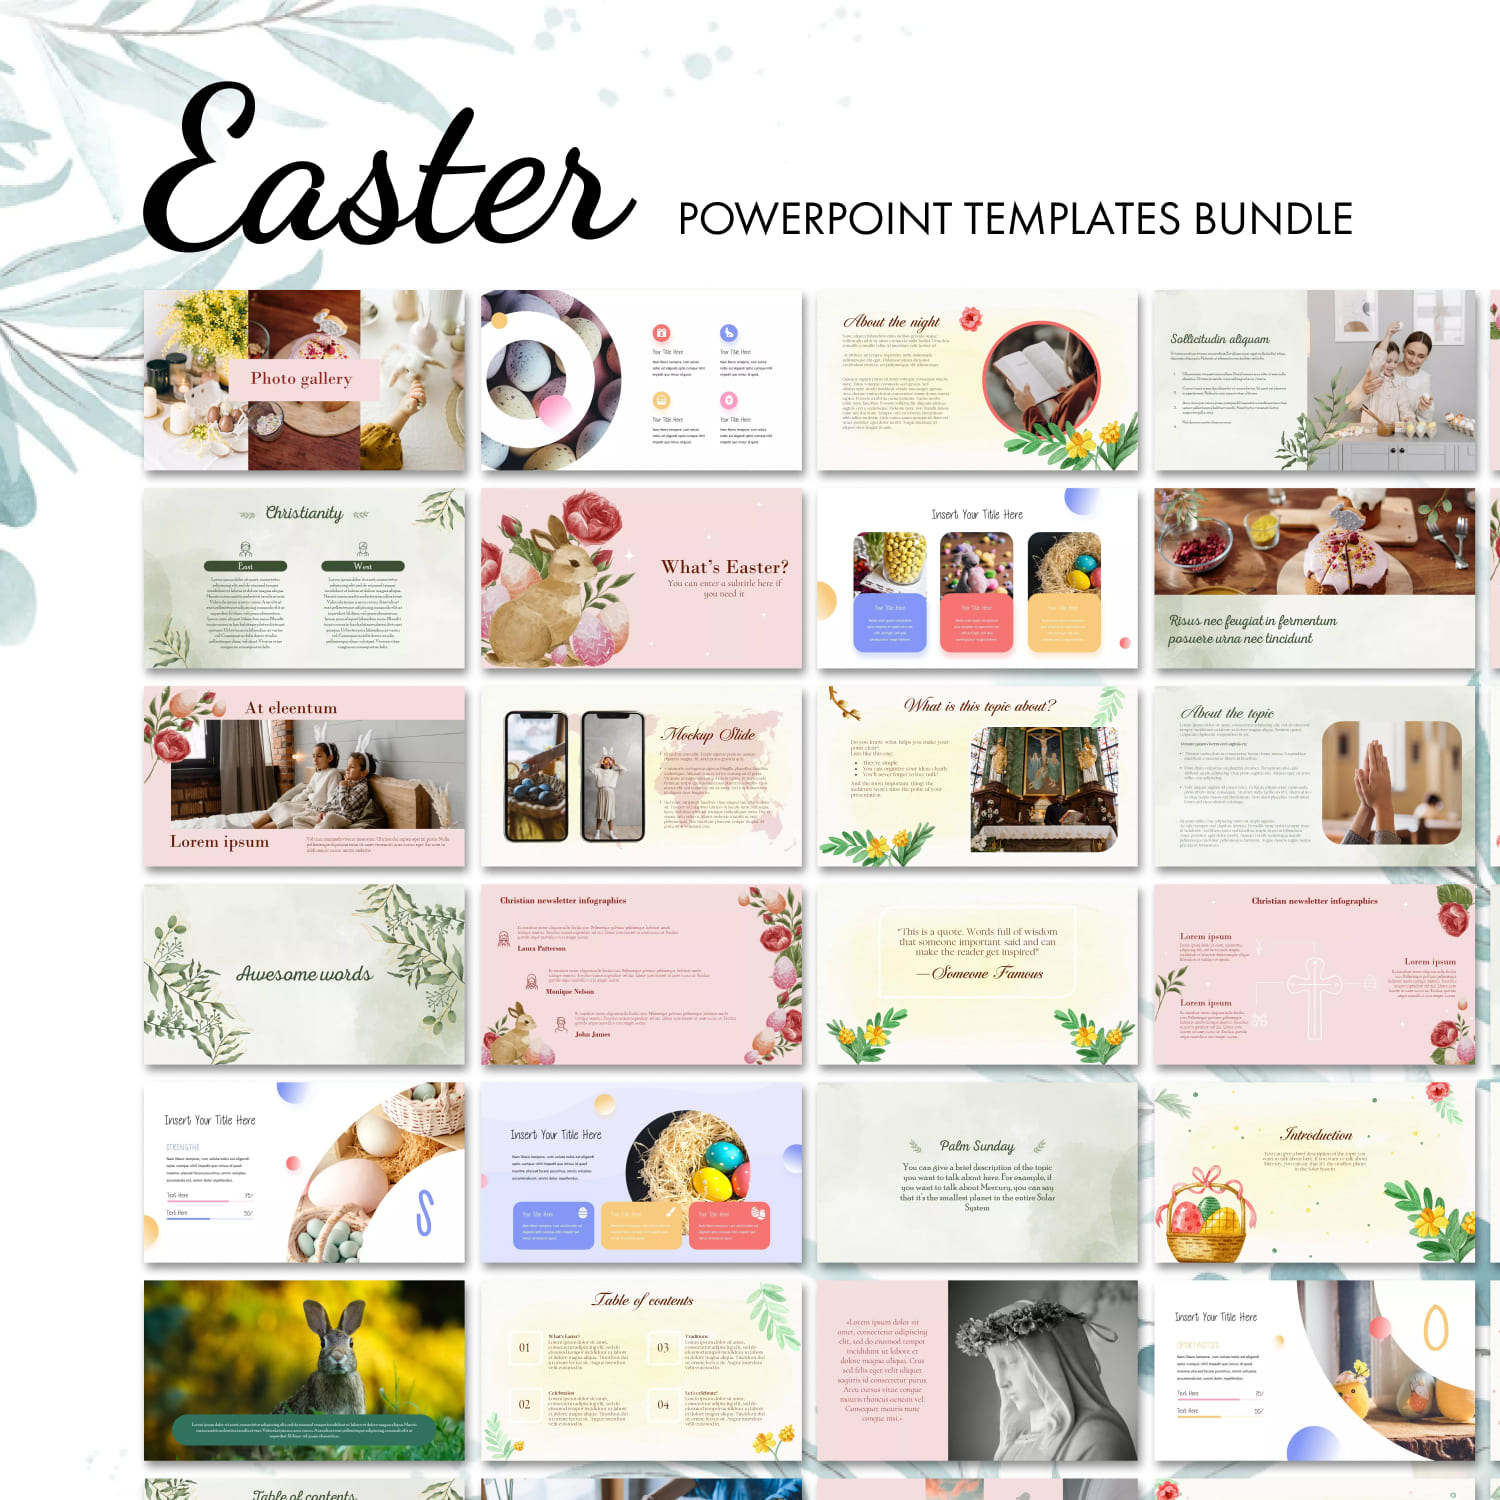 Images with easter powerpoint templates bundle.